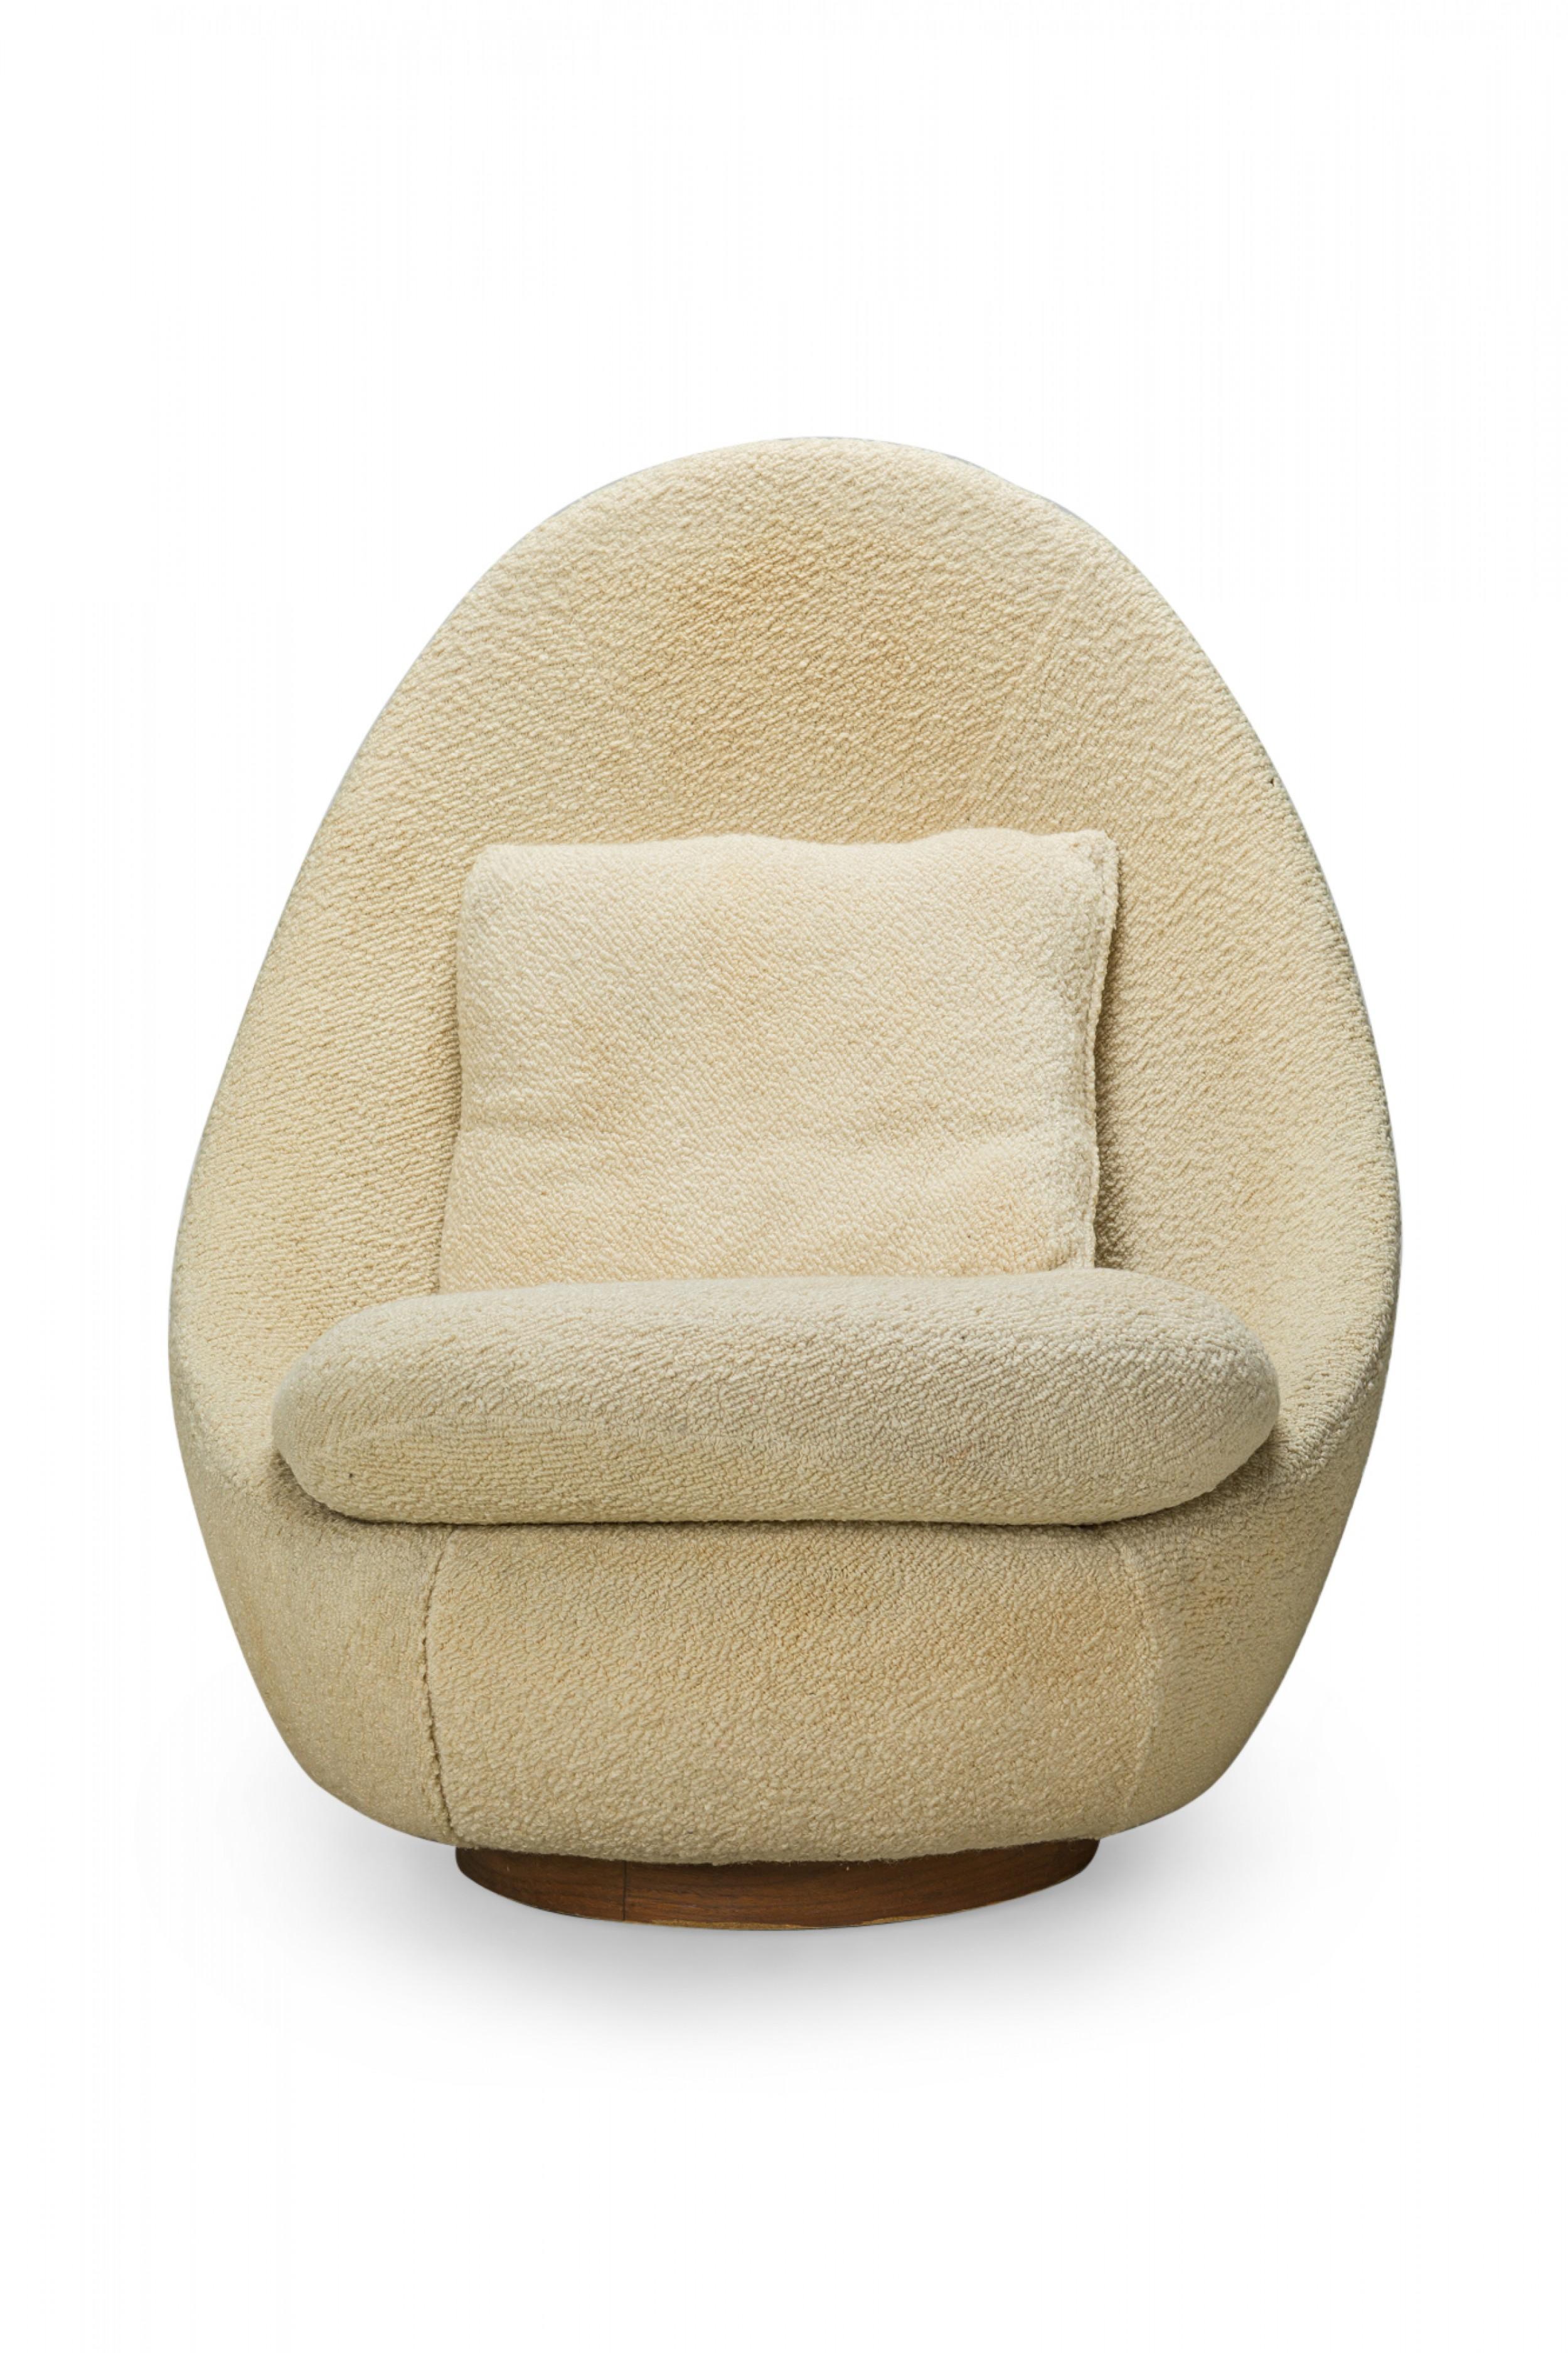 American Mid-Century swivel egg chair with a curved form upholstered in textured beige upholstery with a matching throw pillow. (MILO BAUGHMAN)(Available in other fabrics: DUF0341, DUF0343).
 